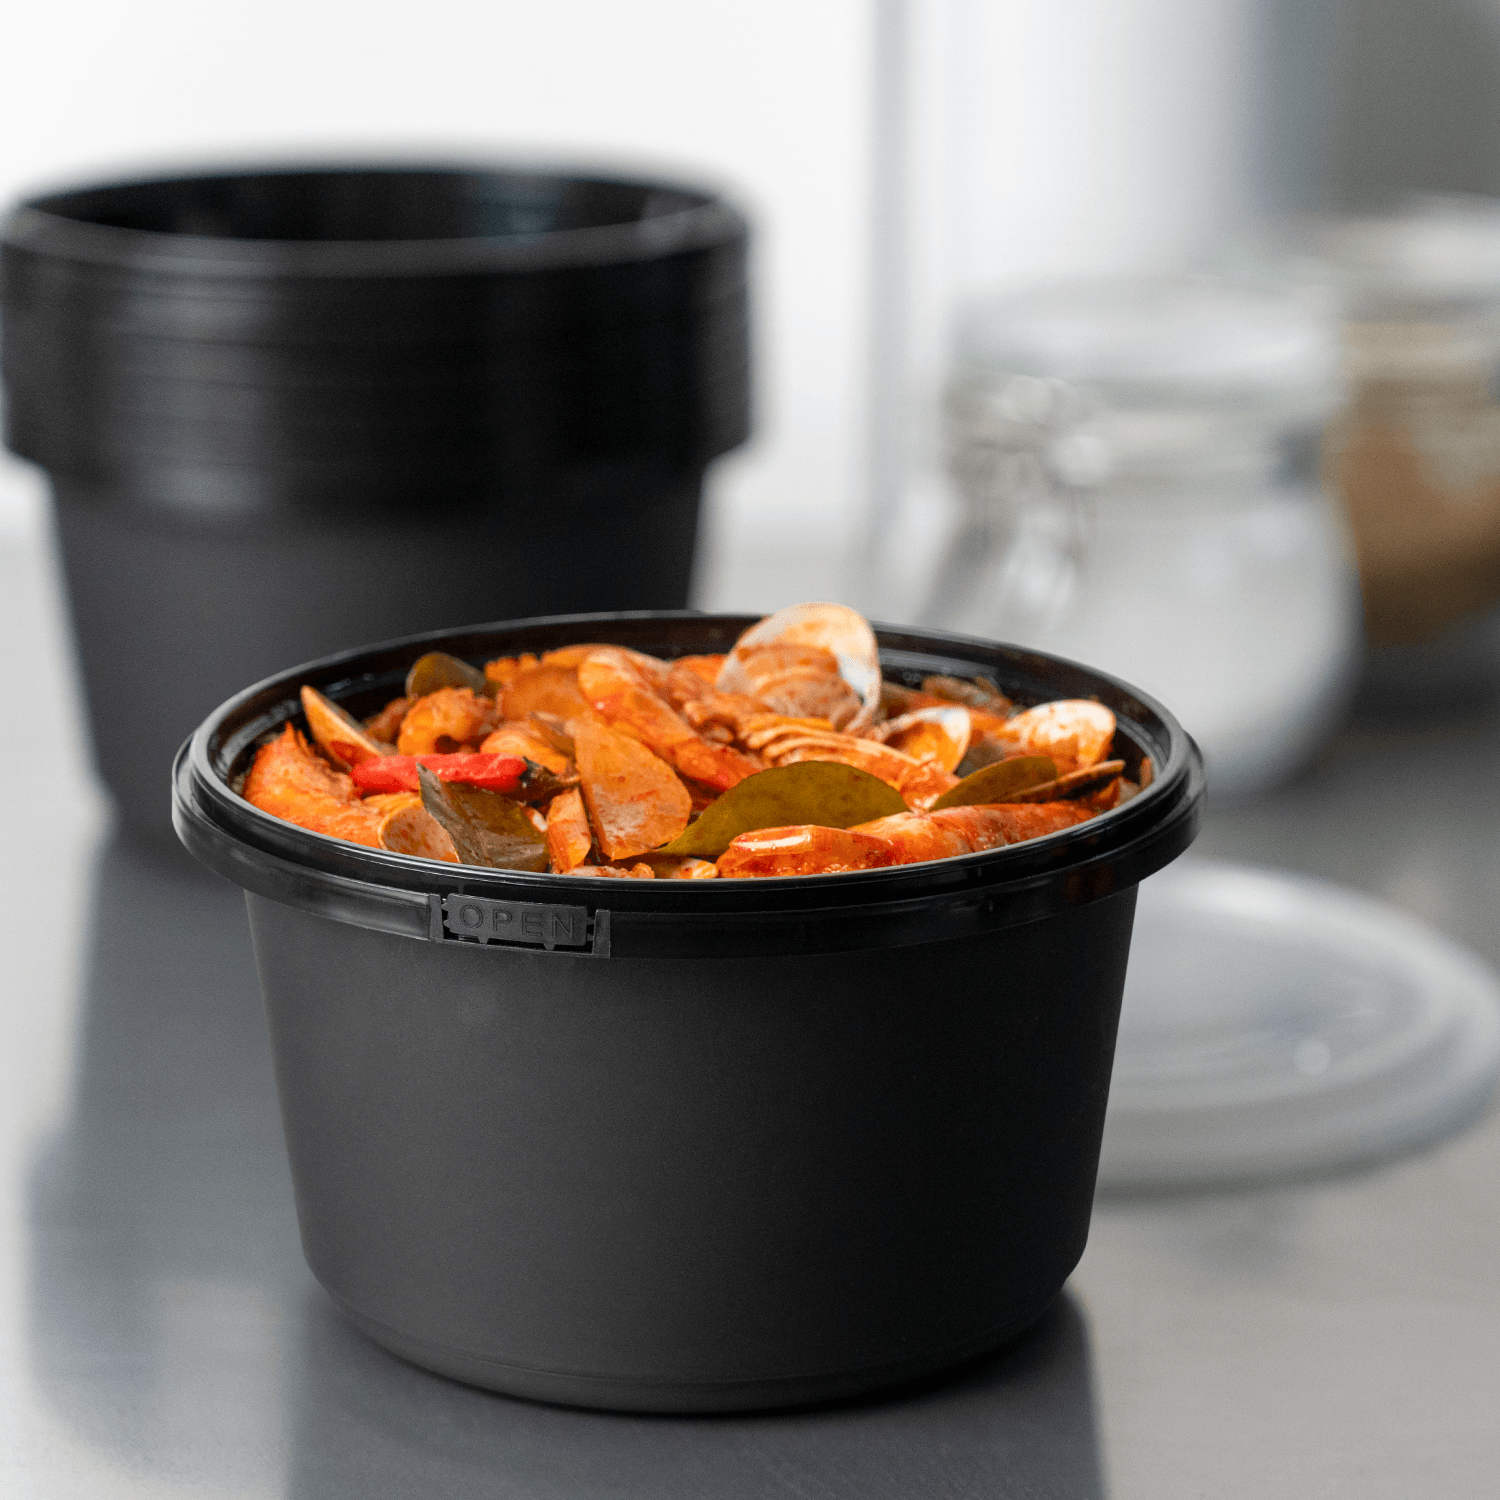 Karat 52oz PP Tamper Resistant Injection Molded Microwaveable Black Food Container w/Clear lid - 150 pcs